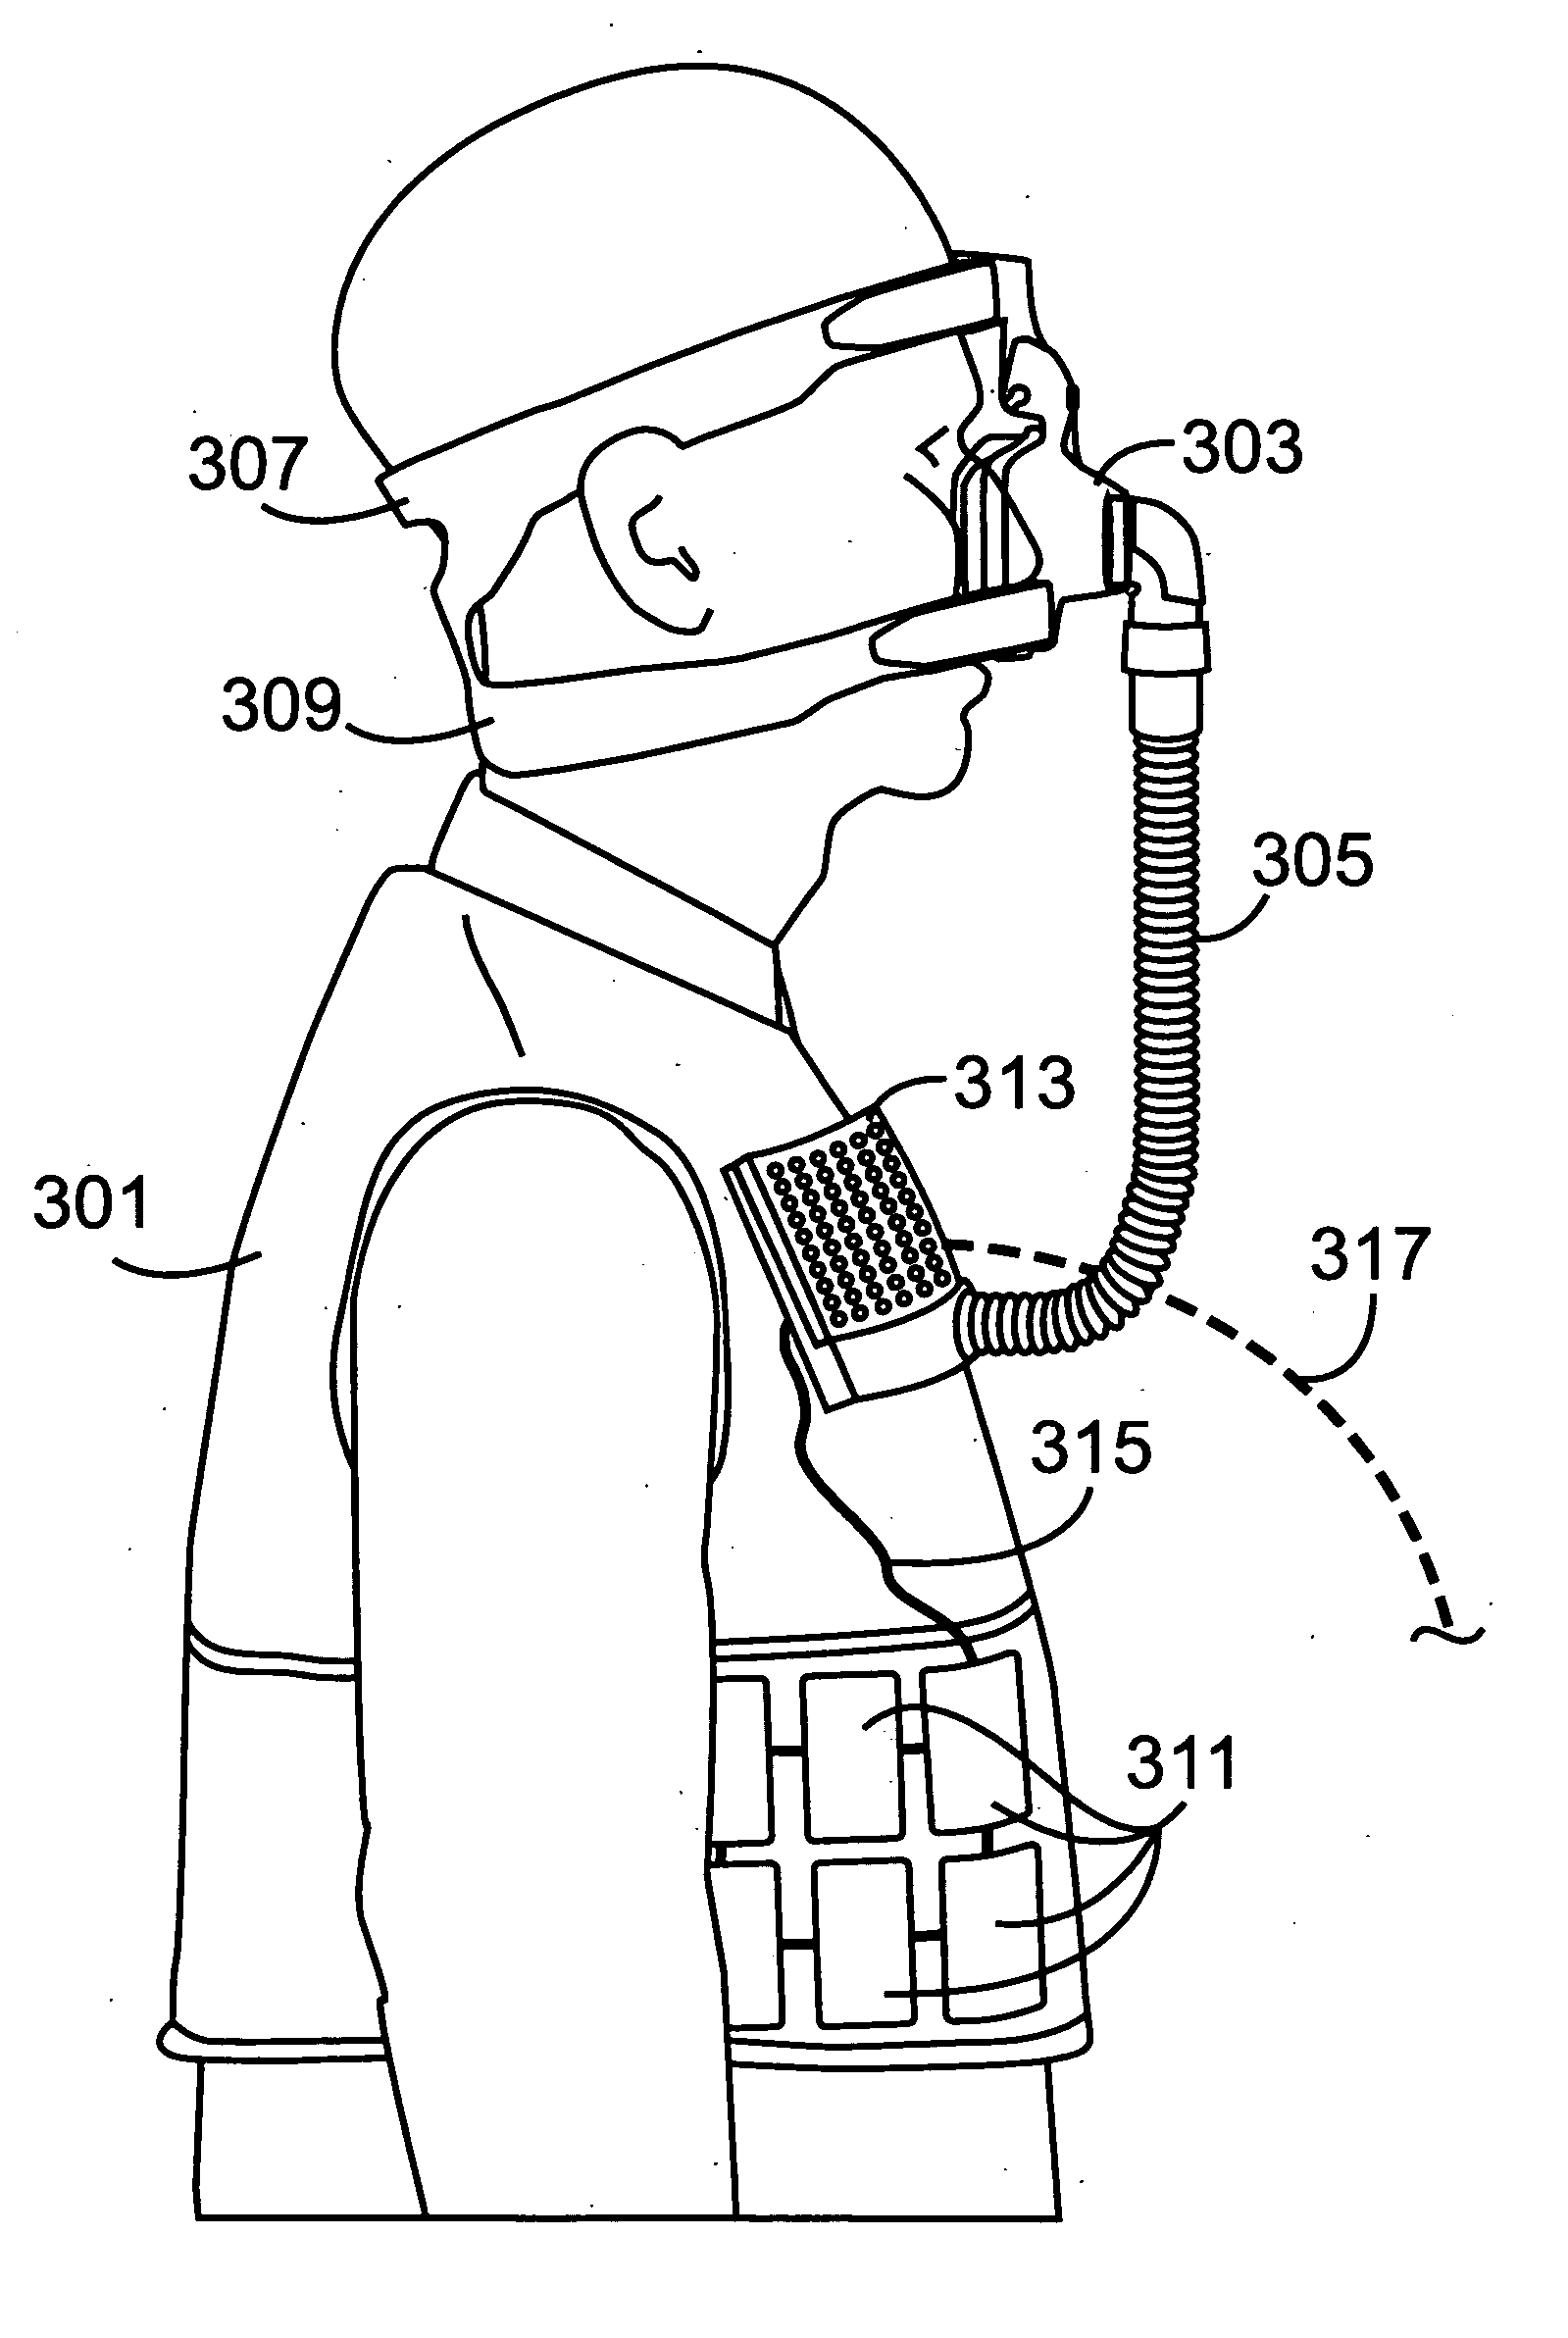 Wearable system for positive airway pressure therapy